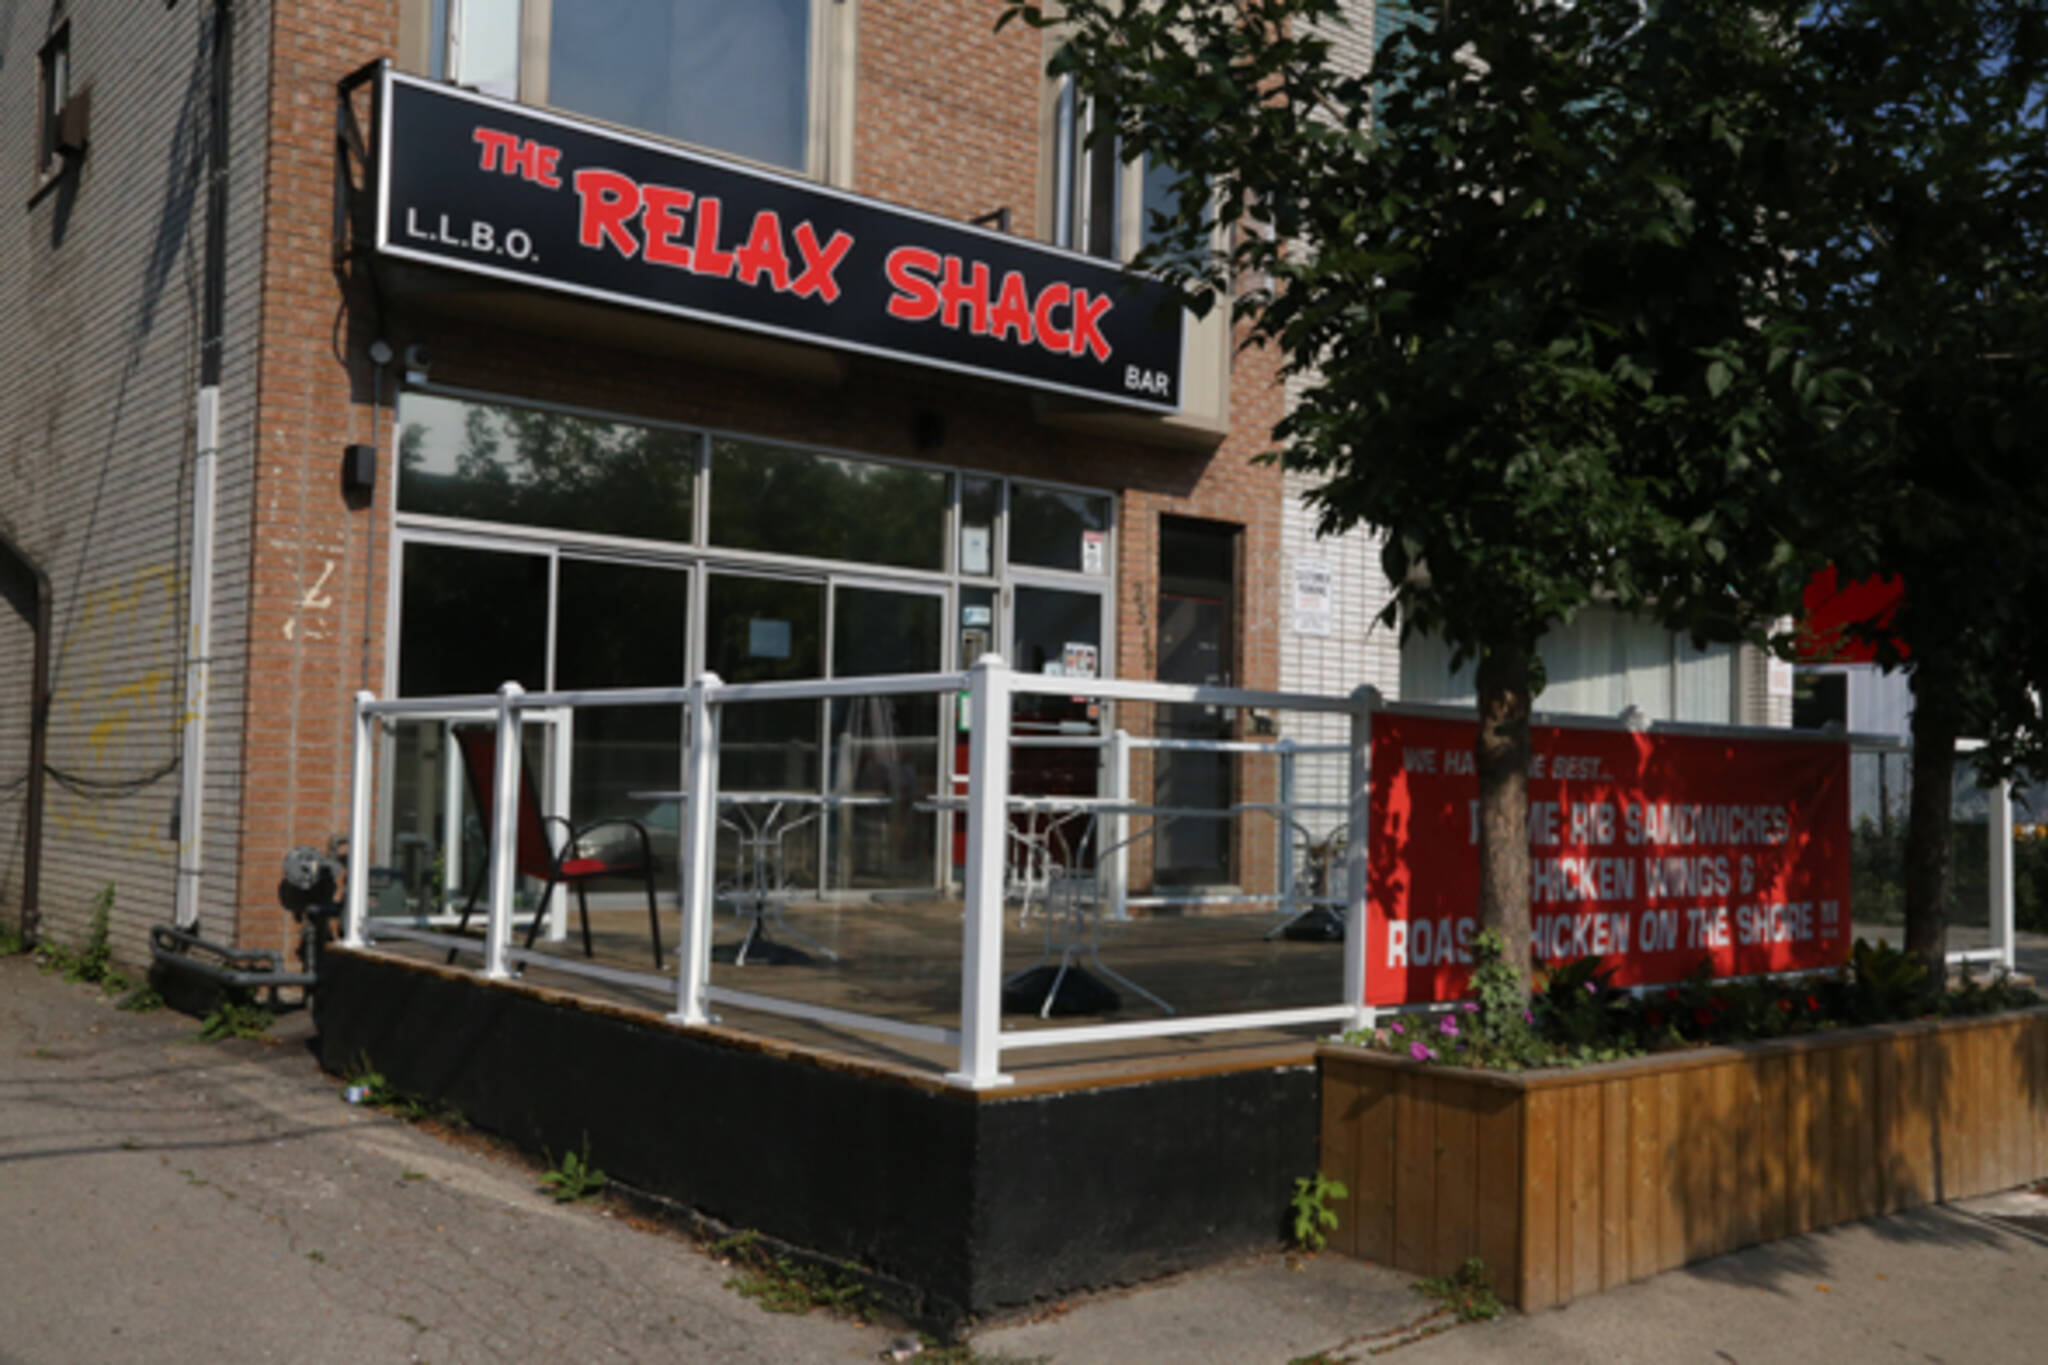 The Relax Shack